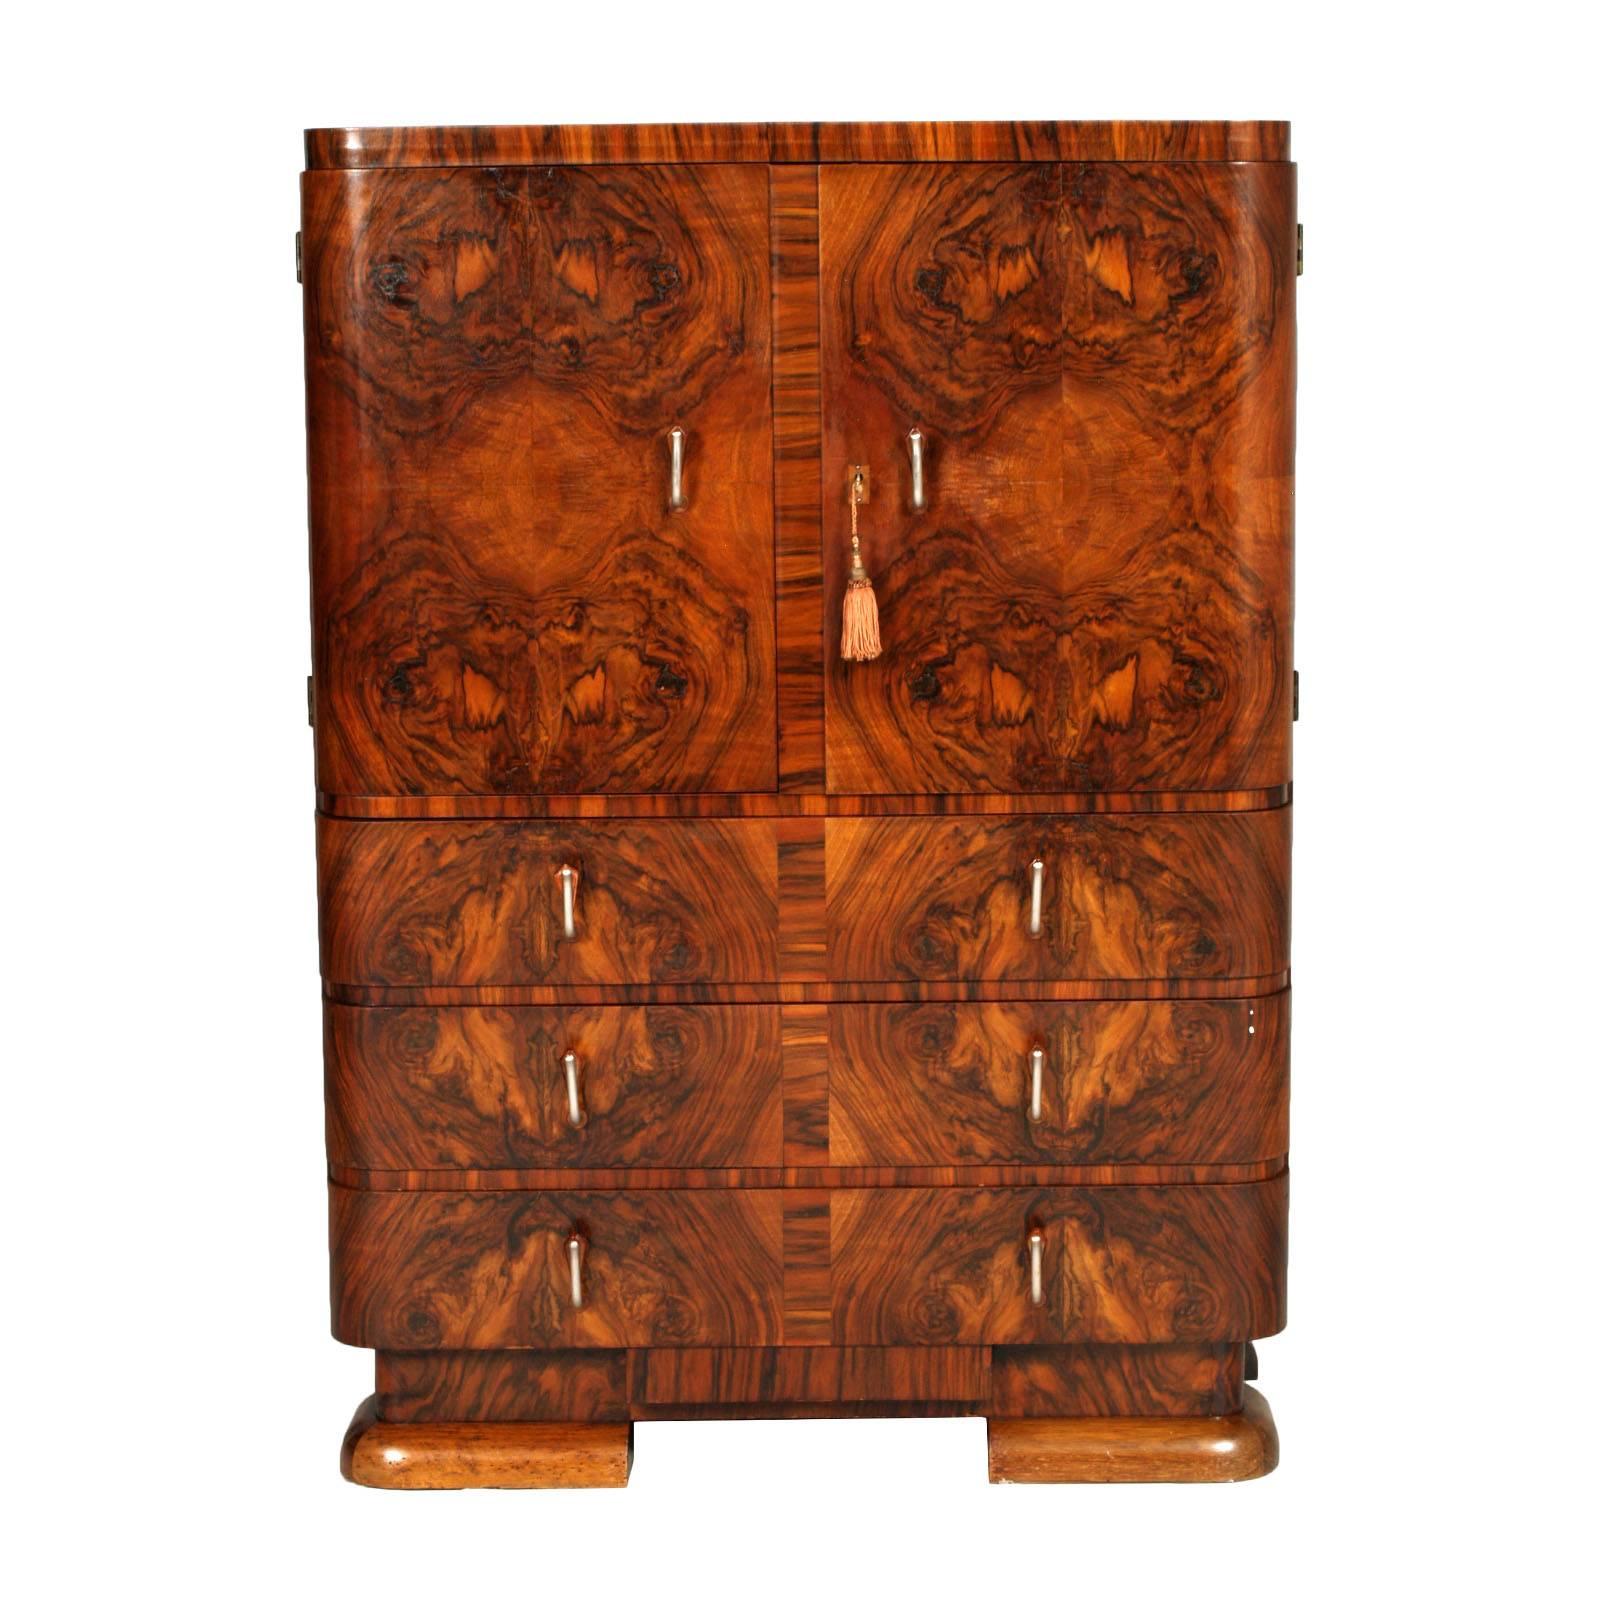 Exquisite refined Art Deco cabinet dresser by Crafts Cantu in walnut and burl walnut applied in excellent condition all original components, polished with wax

Measures cm: H 133 W 95 D 45.